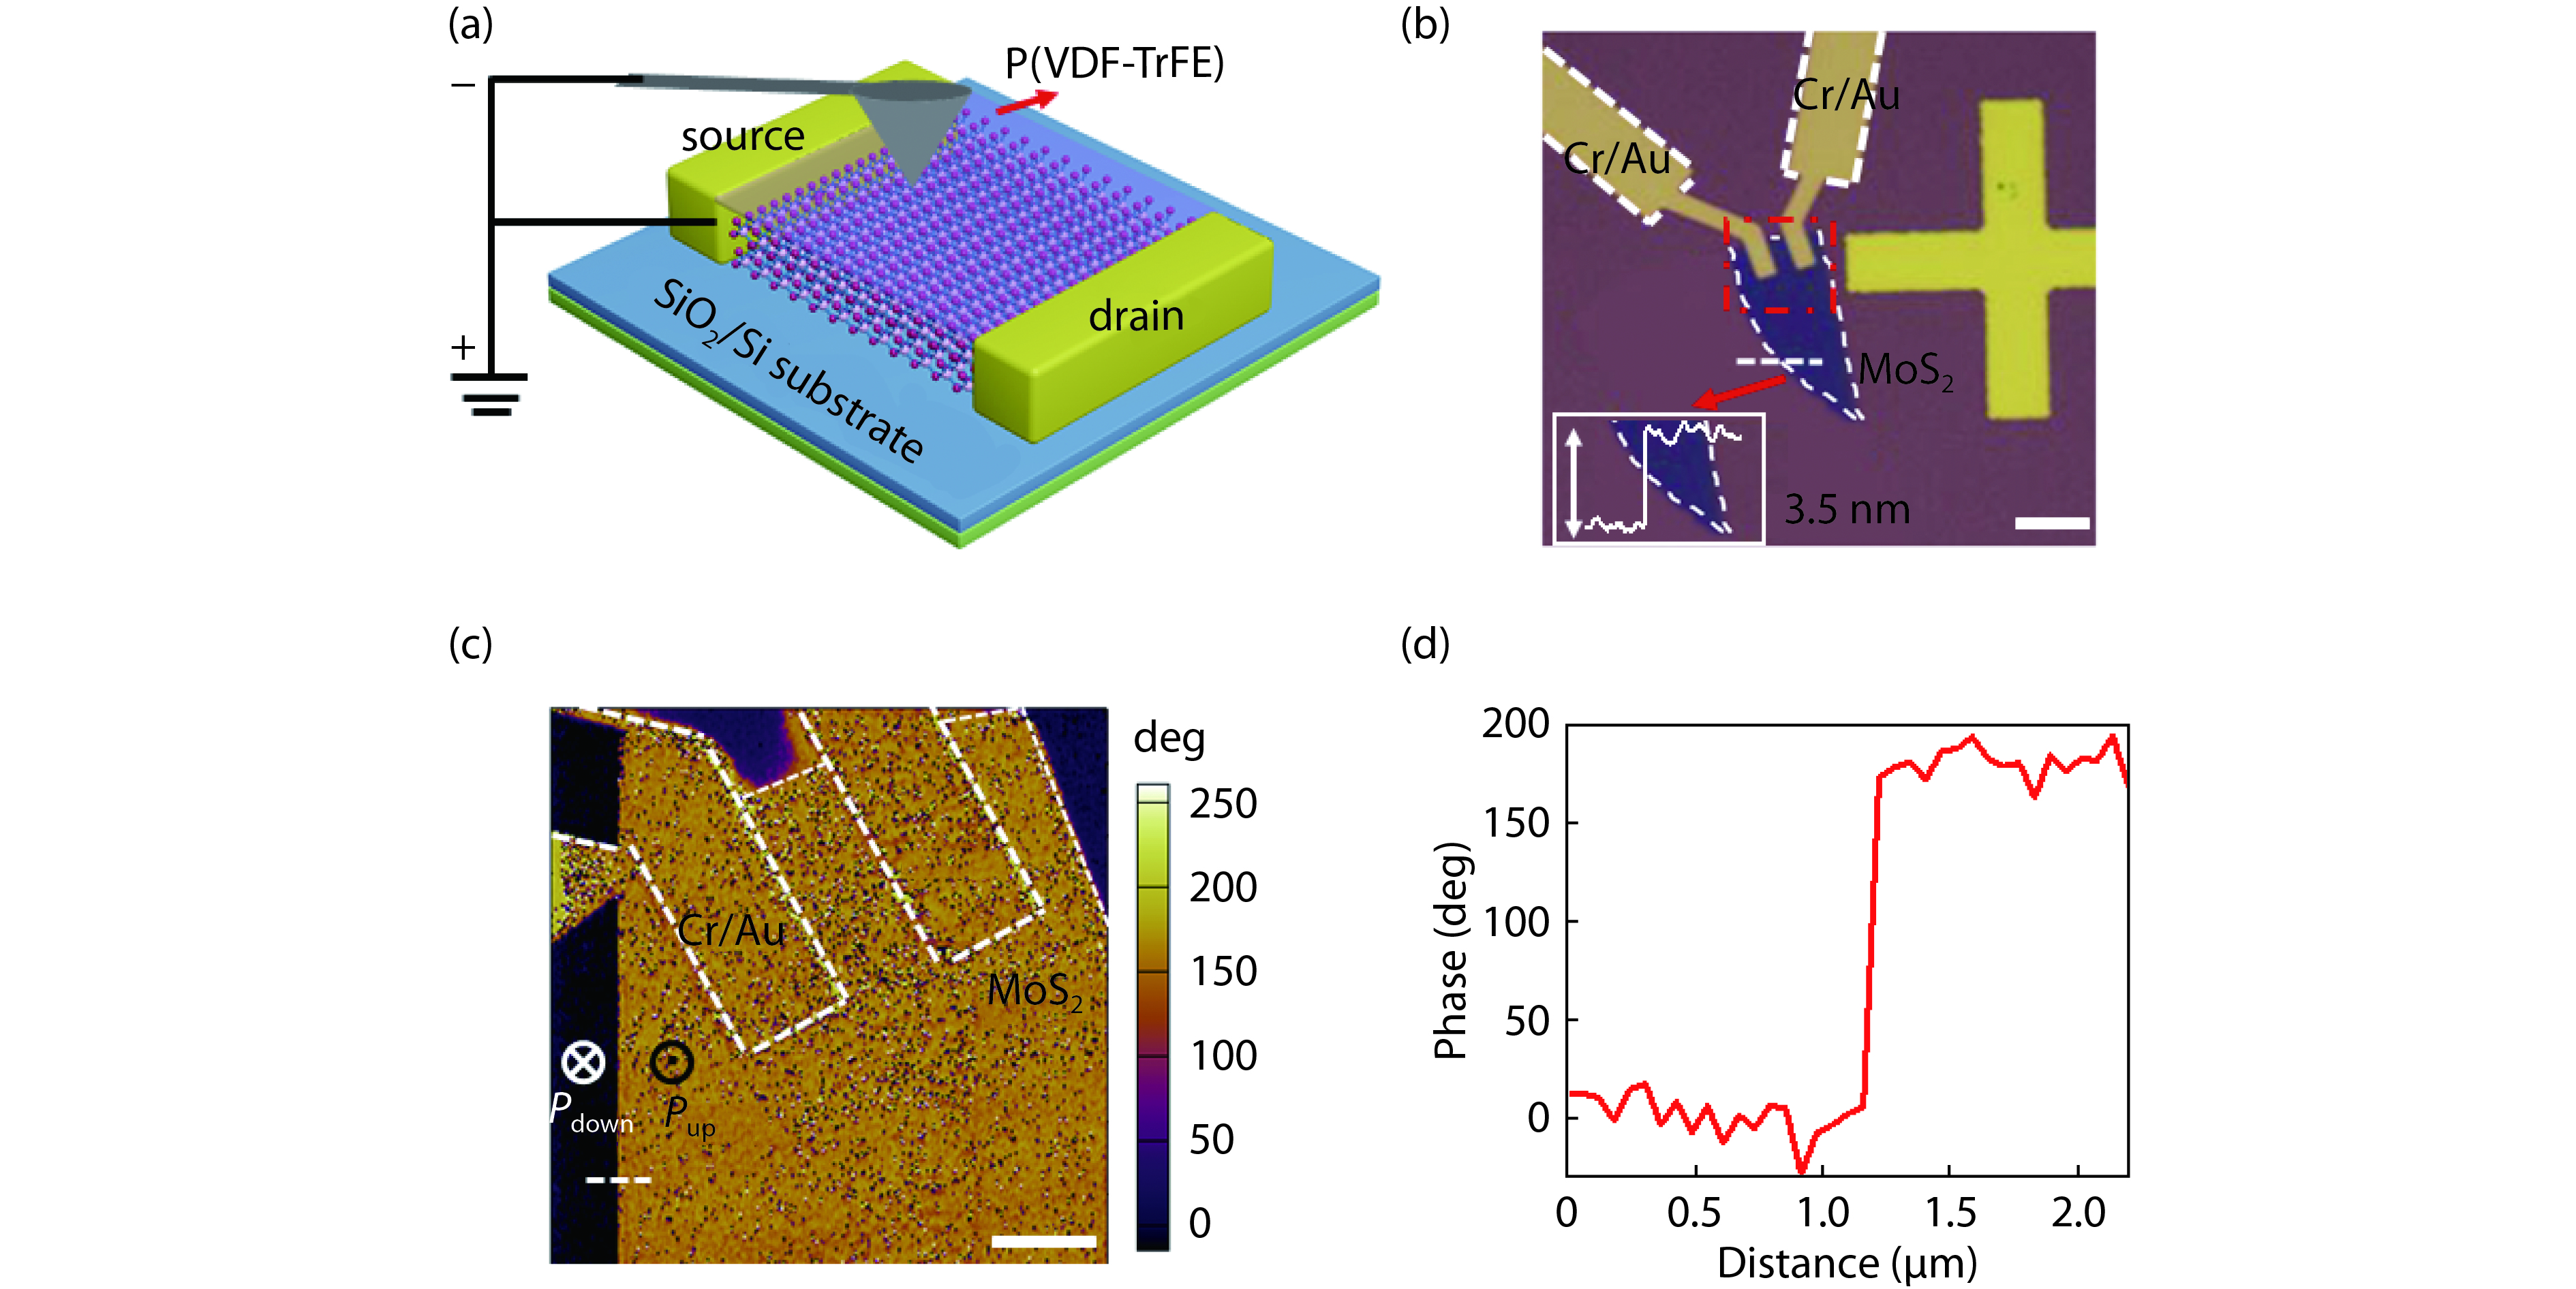 (Color online) Structure illustration of the gate-free MoS2 photodetector. (a) A 3D schematic of the device structure. (b) The optical image of the device, which includes a 3.5 nm MoS2 and Cr/Au source and drain electrodes covered by 50 nm-thick P(VDF-TrFE) film, scale bar is 10 μm. (c) The PFM phase image of the device (red square part in (b)), two polarization states of Pdown and Pup represent the opposite direction of the electric dipole moment in different parts (orange and black), scale bar is 3 μm. (d) Phase profile extracted along the white dashed line in (c), which demonstrated that the MoS2 in the channel has a 180° phase difference with the other part.